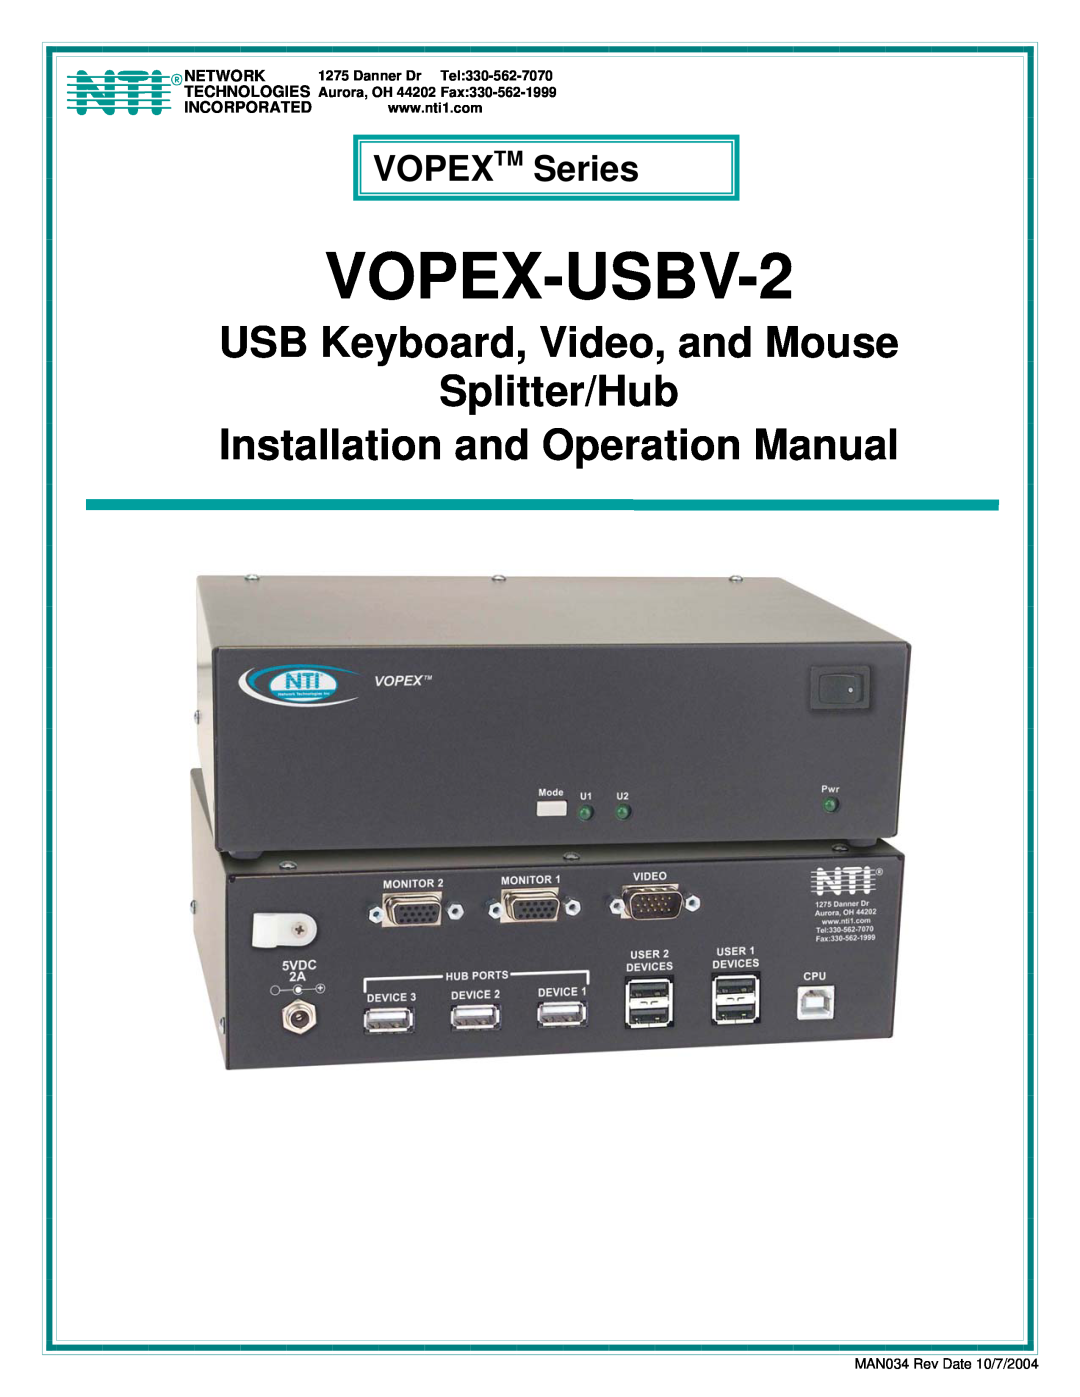 Network Technologies operation manual R Network, Nti Incorporated, VOPEX-USBV-2, USB Keyboard, Video, and Mouse 